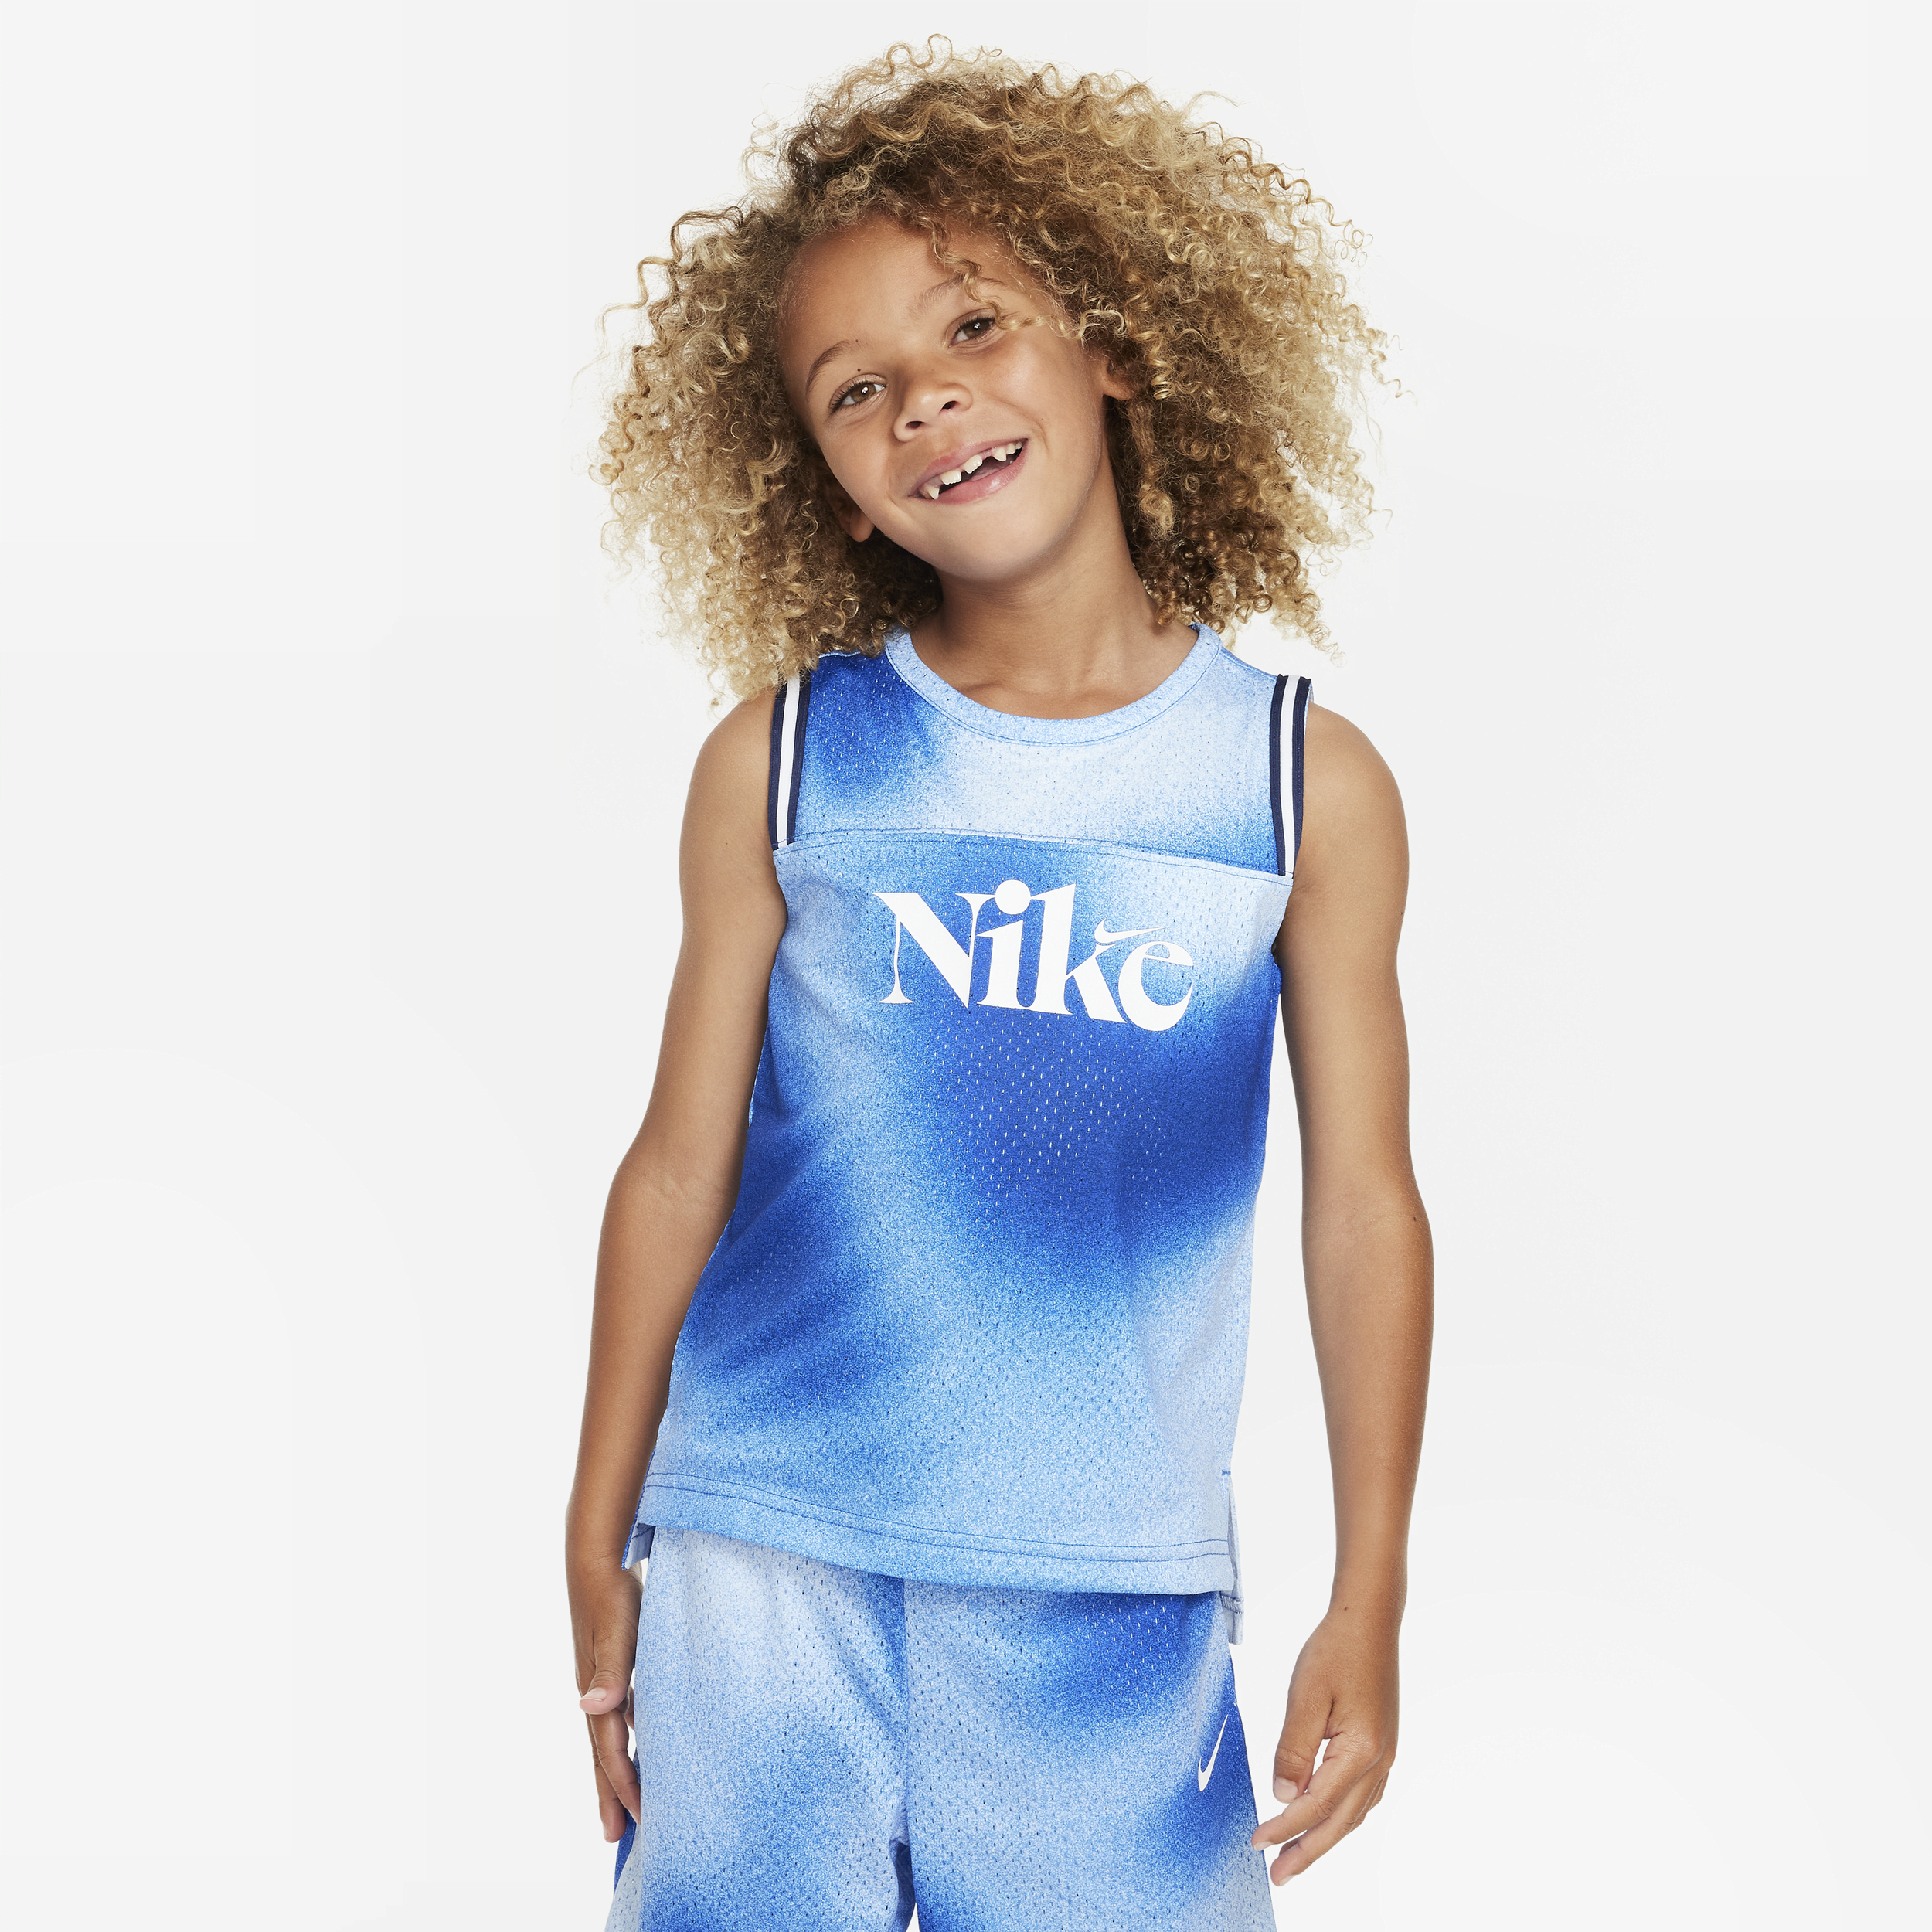 Nike Culture Of Basketball Printed Pinnie Little Kids Top In Blue